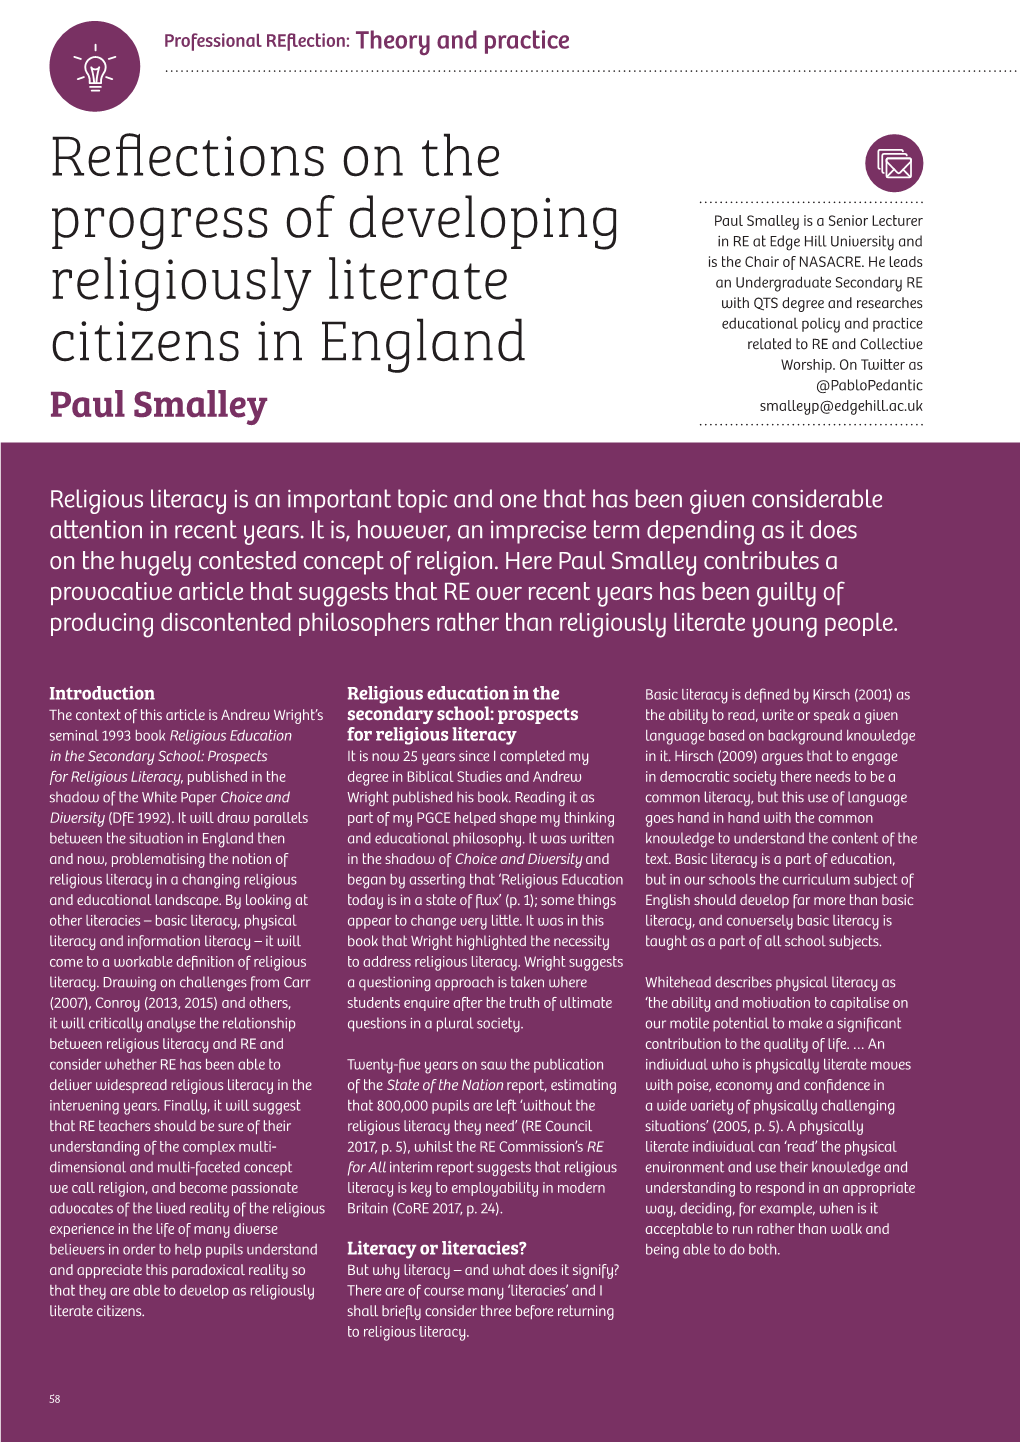 Reflections on the Progress of Developing Religiously Literate Citizens in England